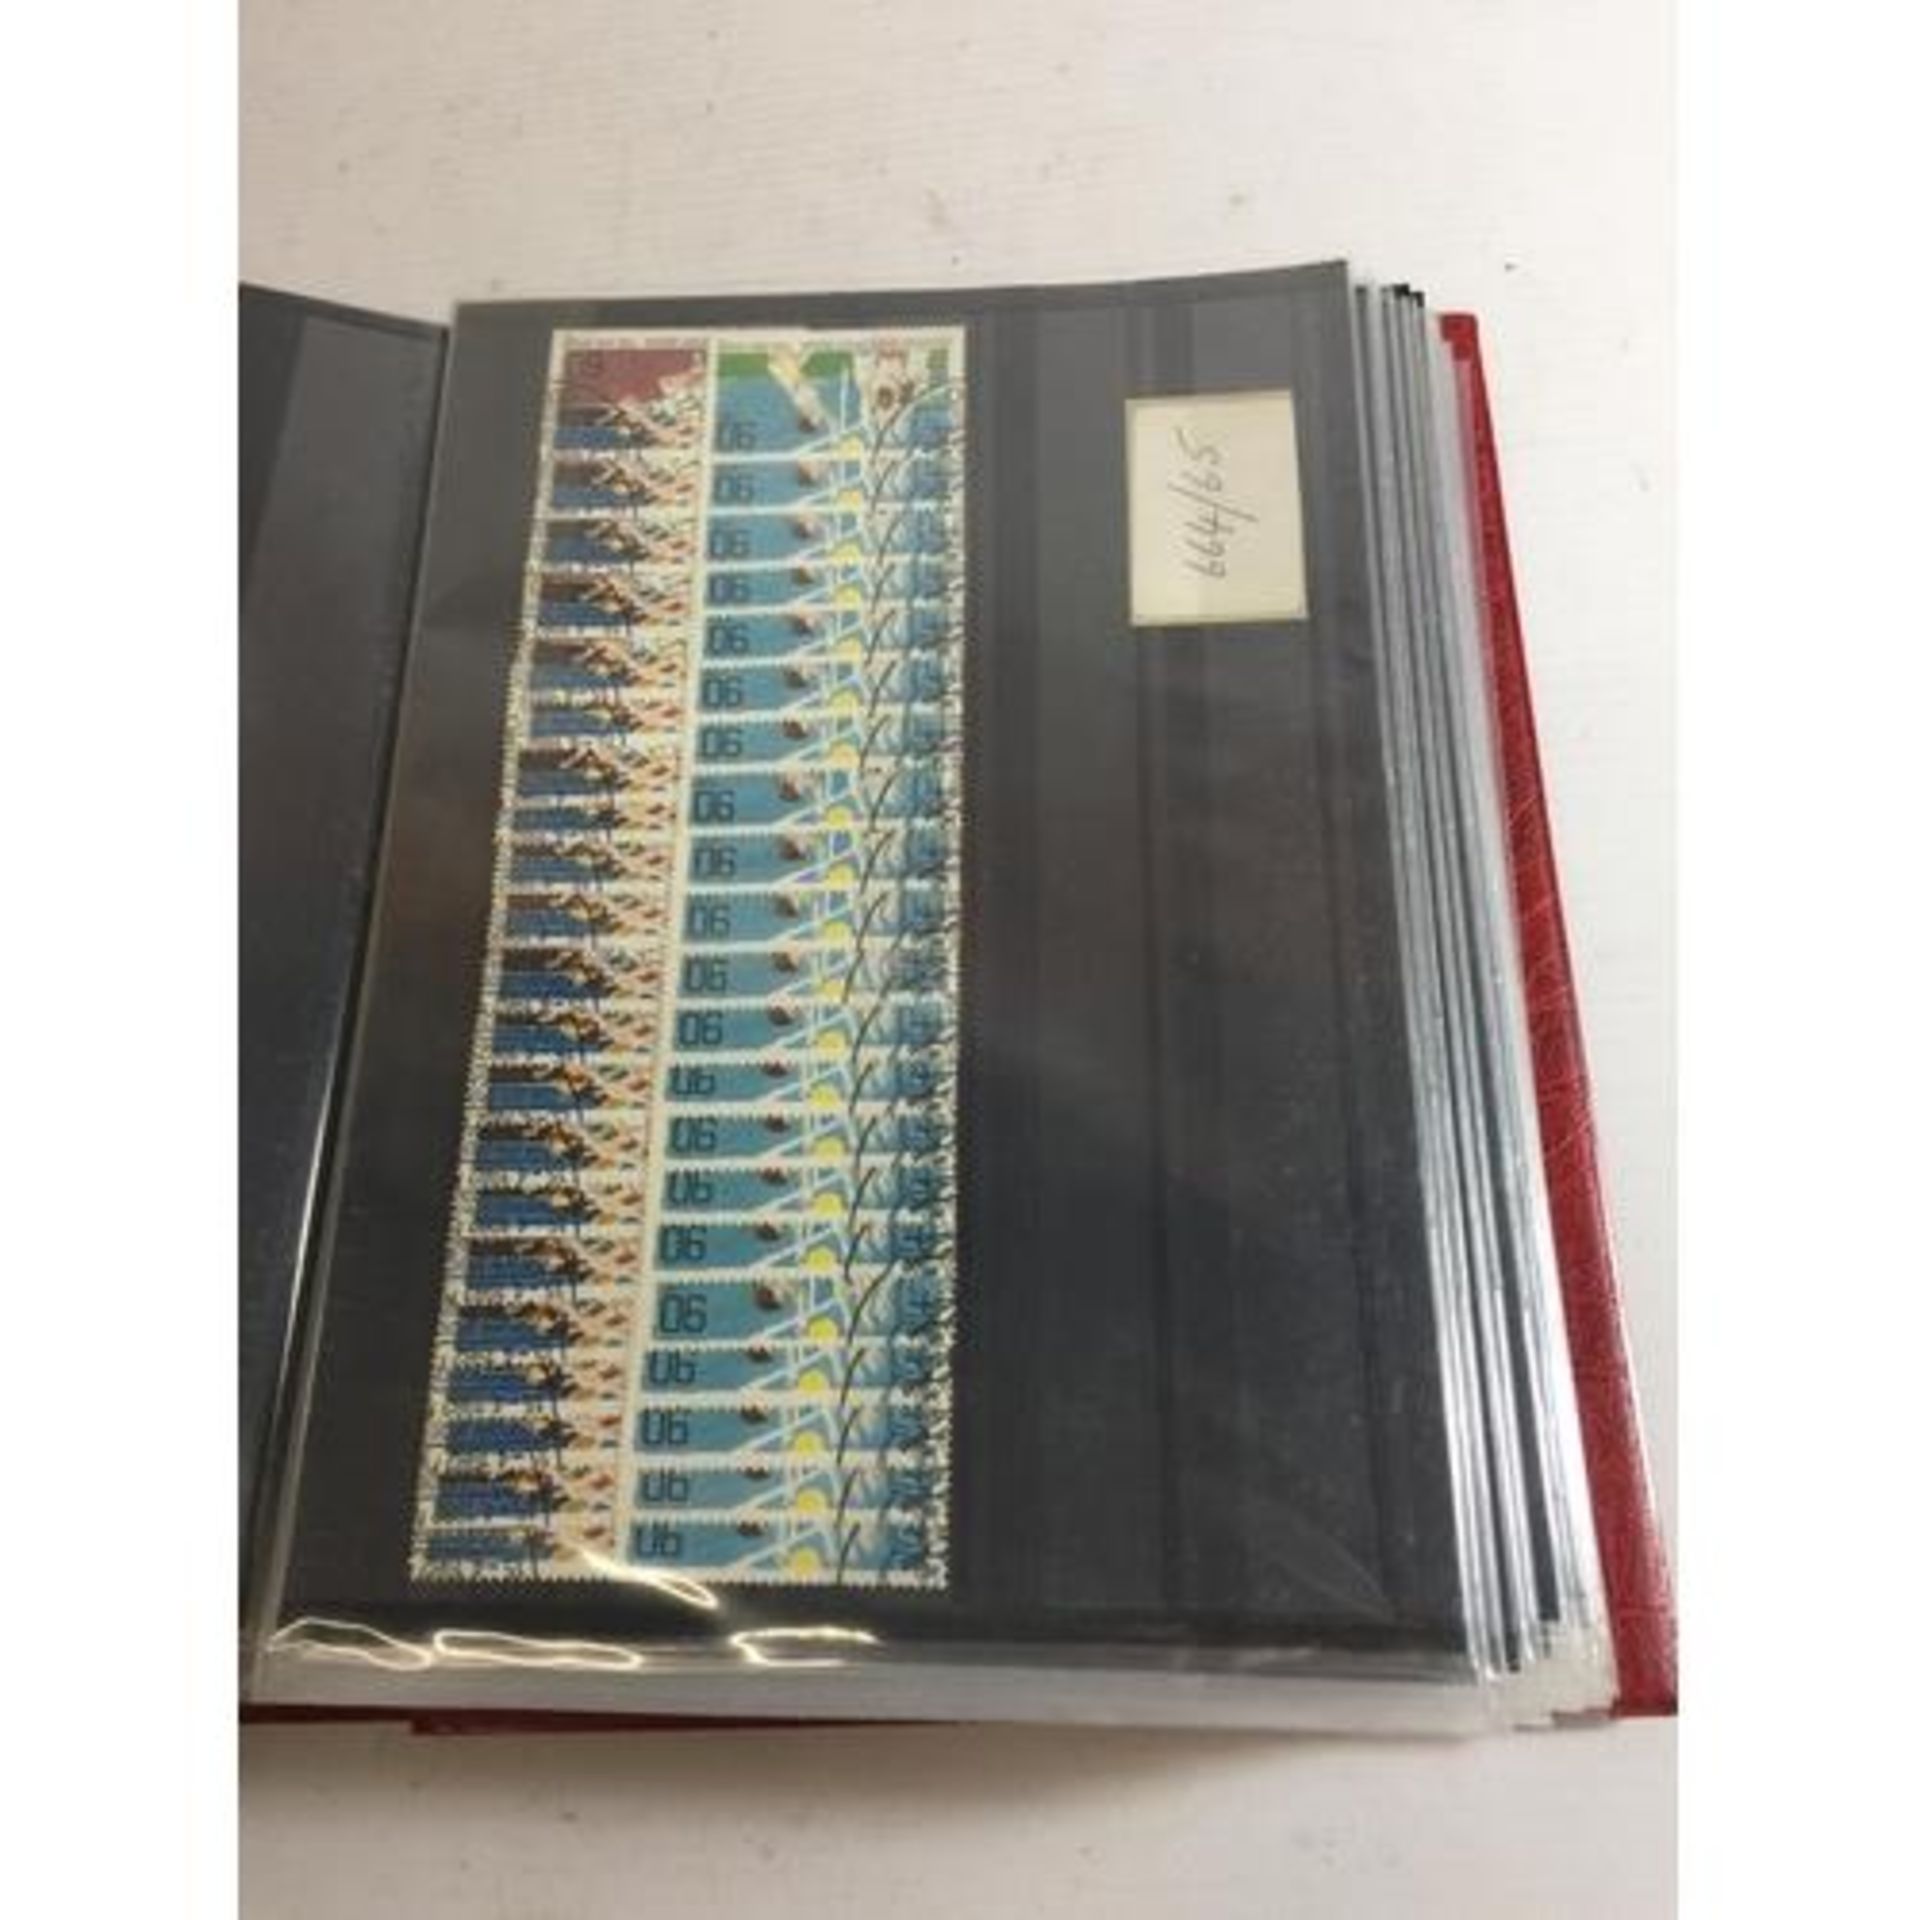 BERLIN , 1974/84 , A FINE USED , DUPLICATED ACCUMULATION IN RED STOCK BINDER - Image 3 of 4